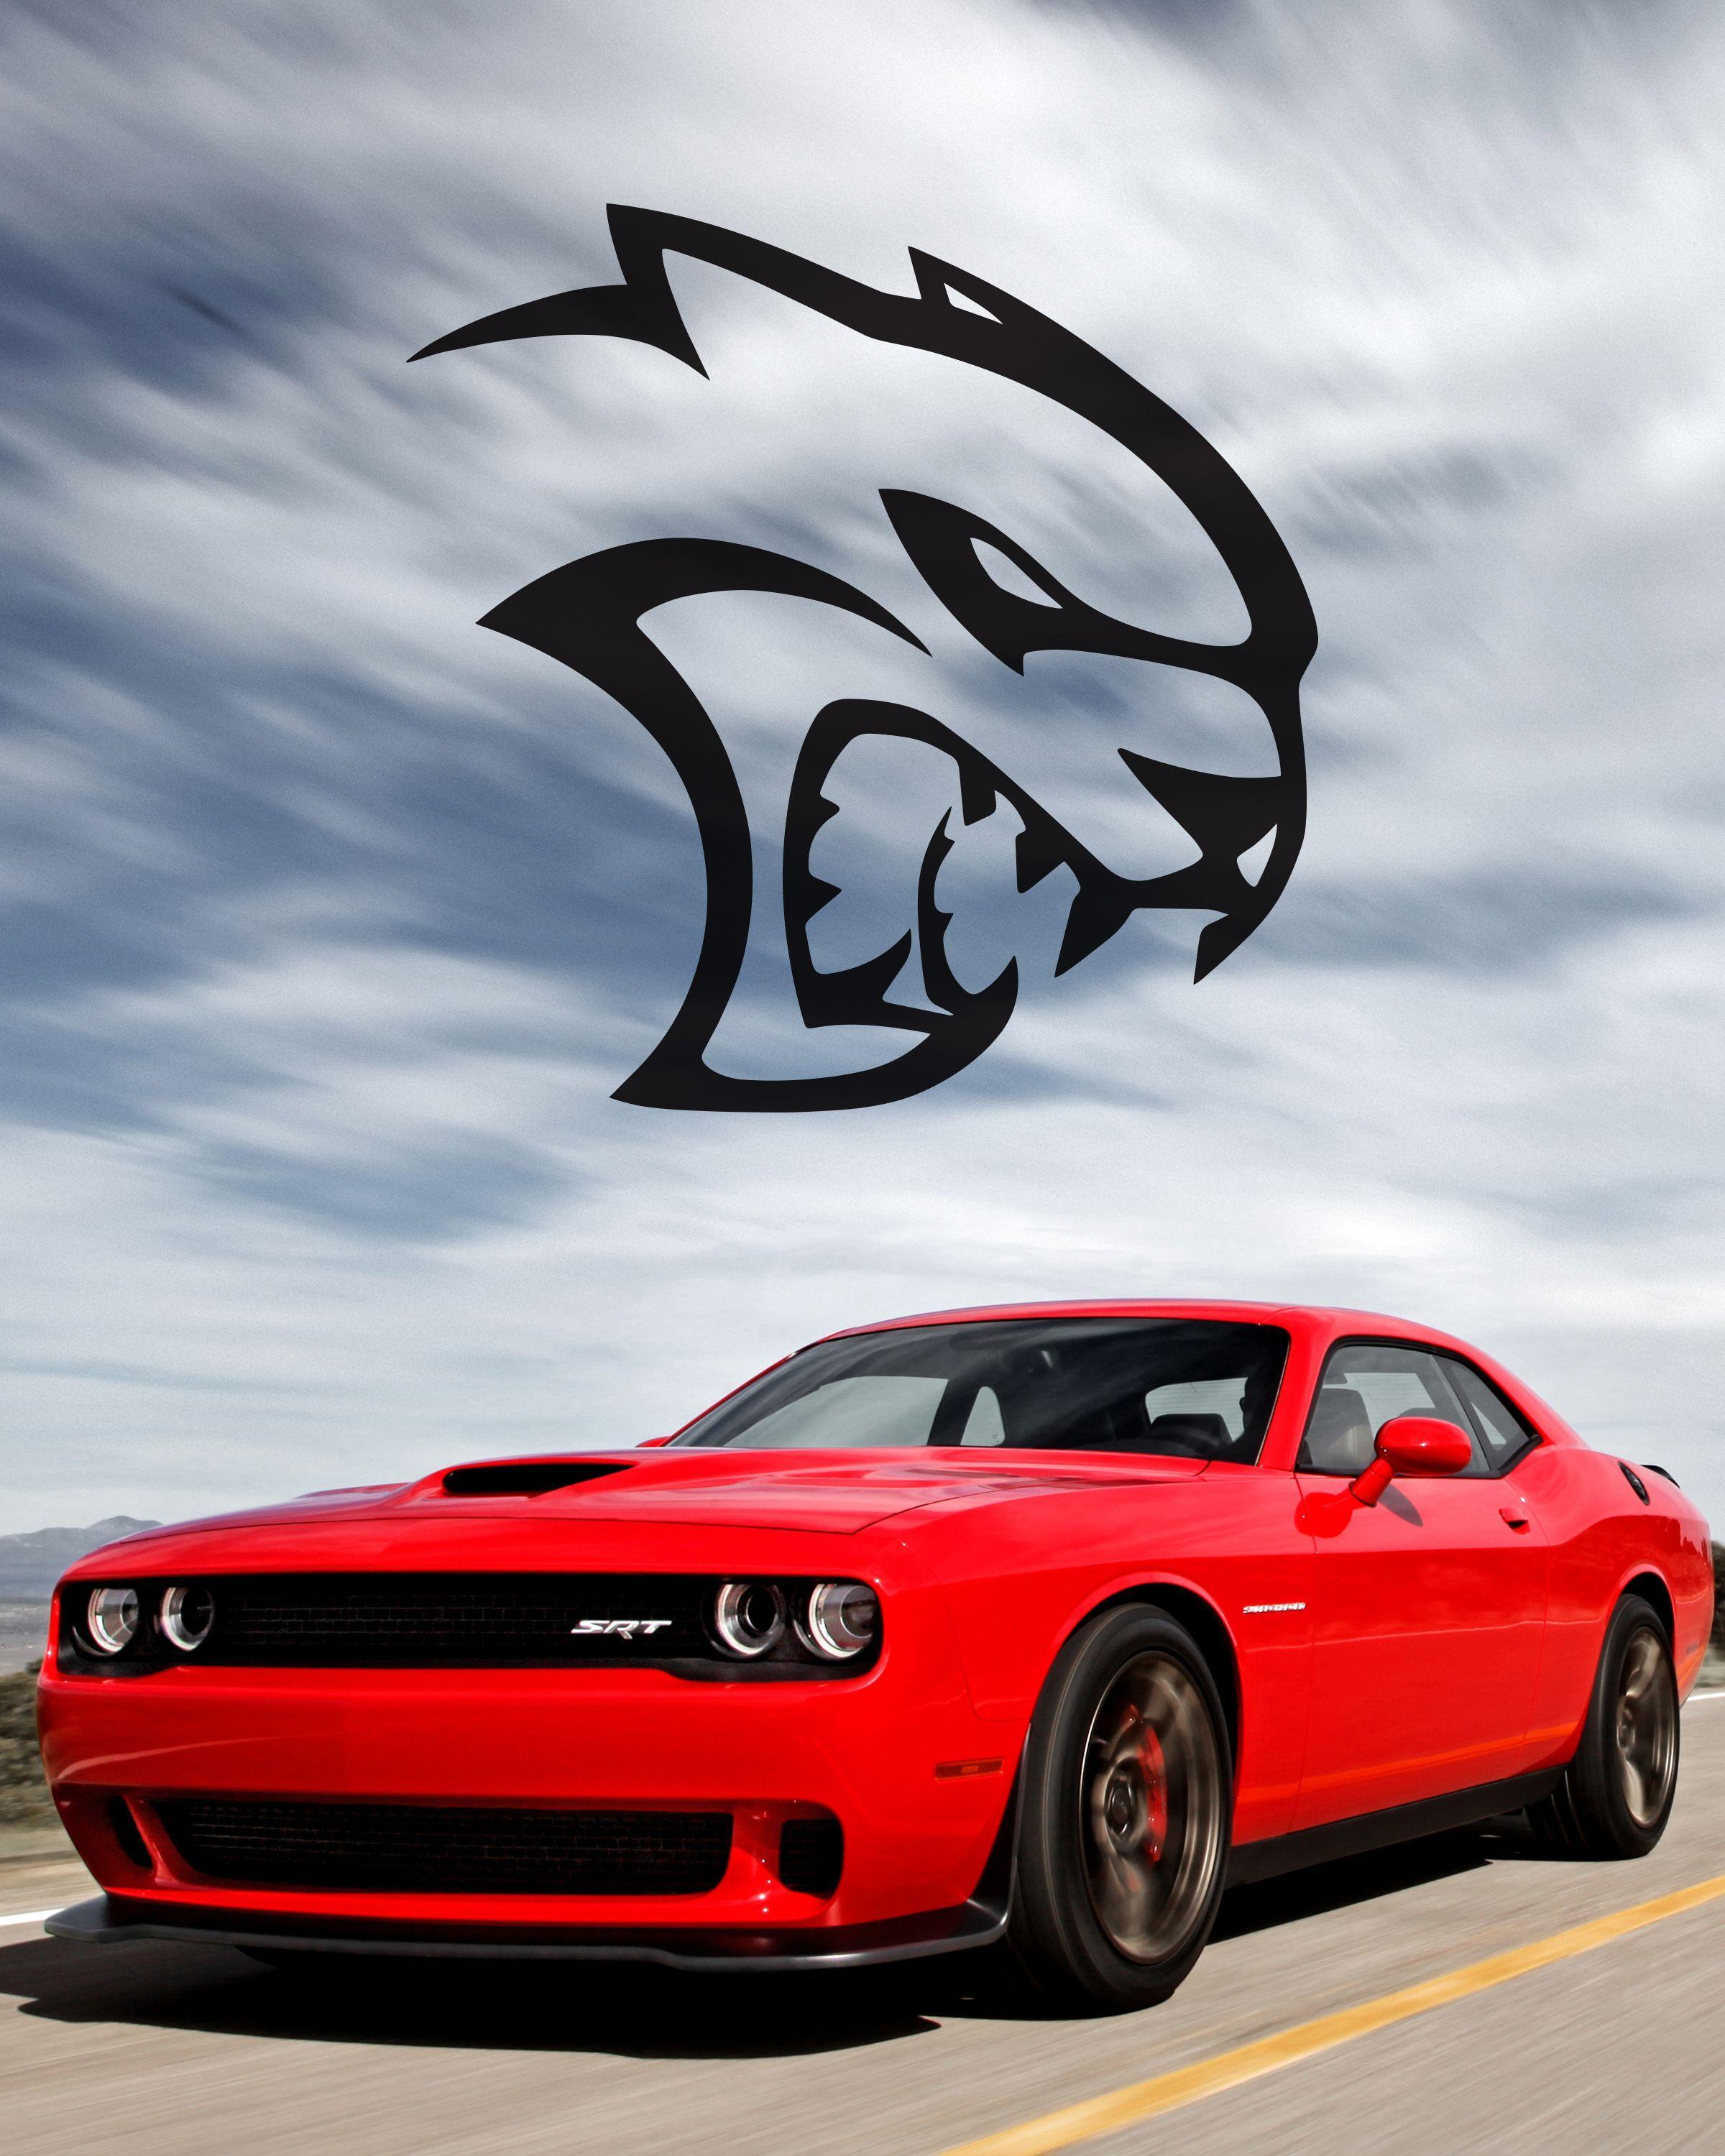 Wallpaper Dodge Dodge Charger SRT Hellcat Cars Sports Car Muscle Car  Background  Download Free Image